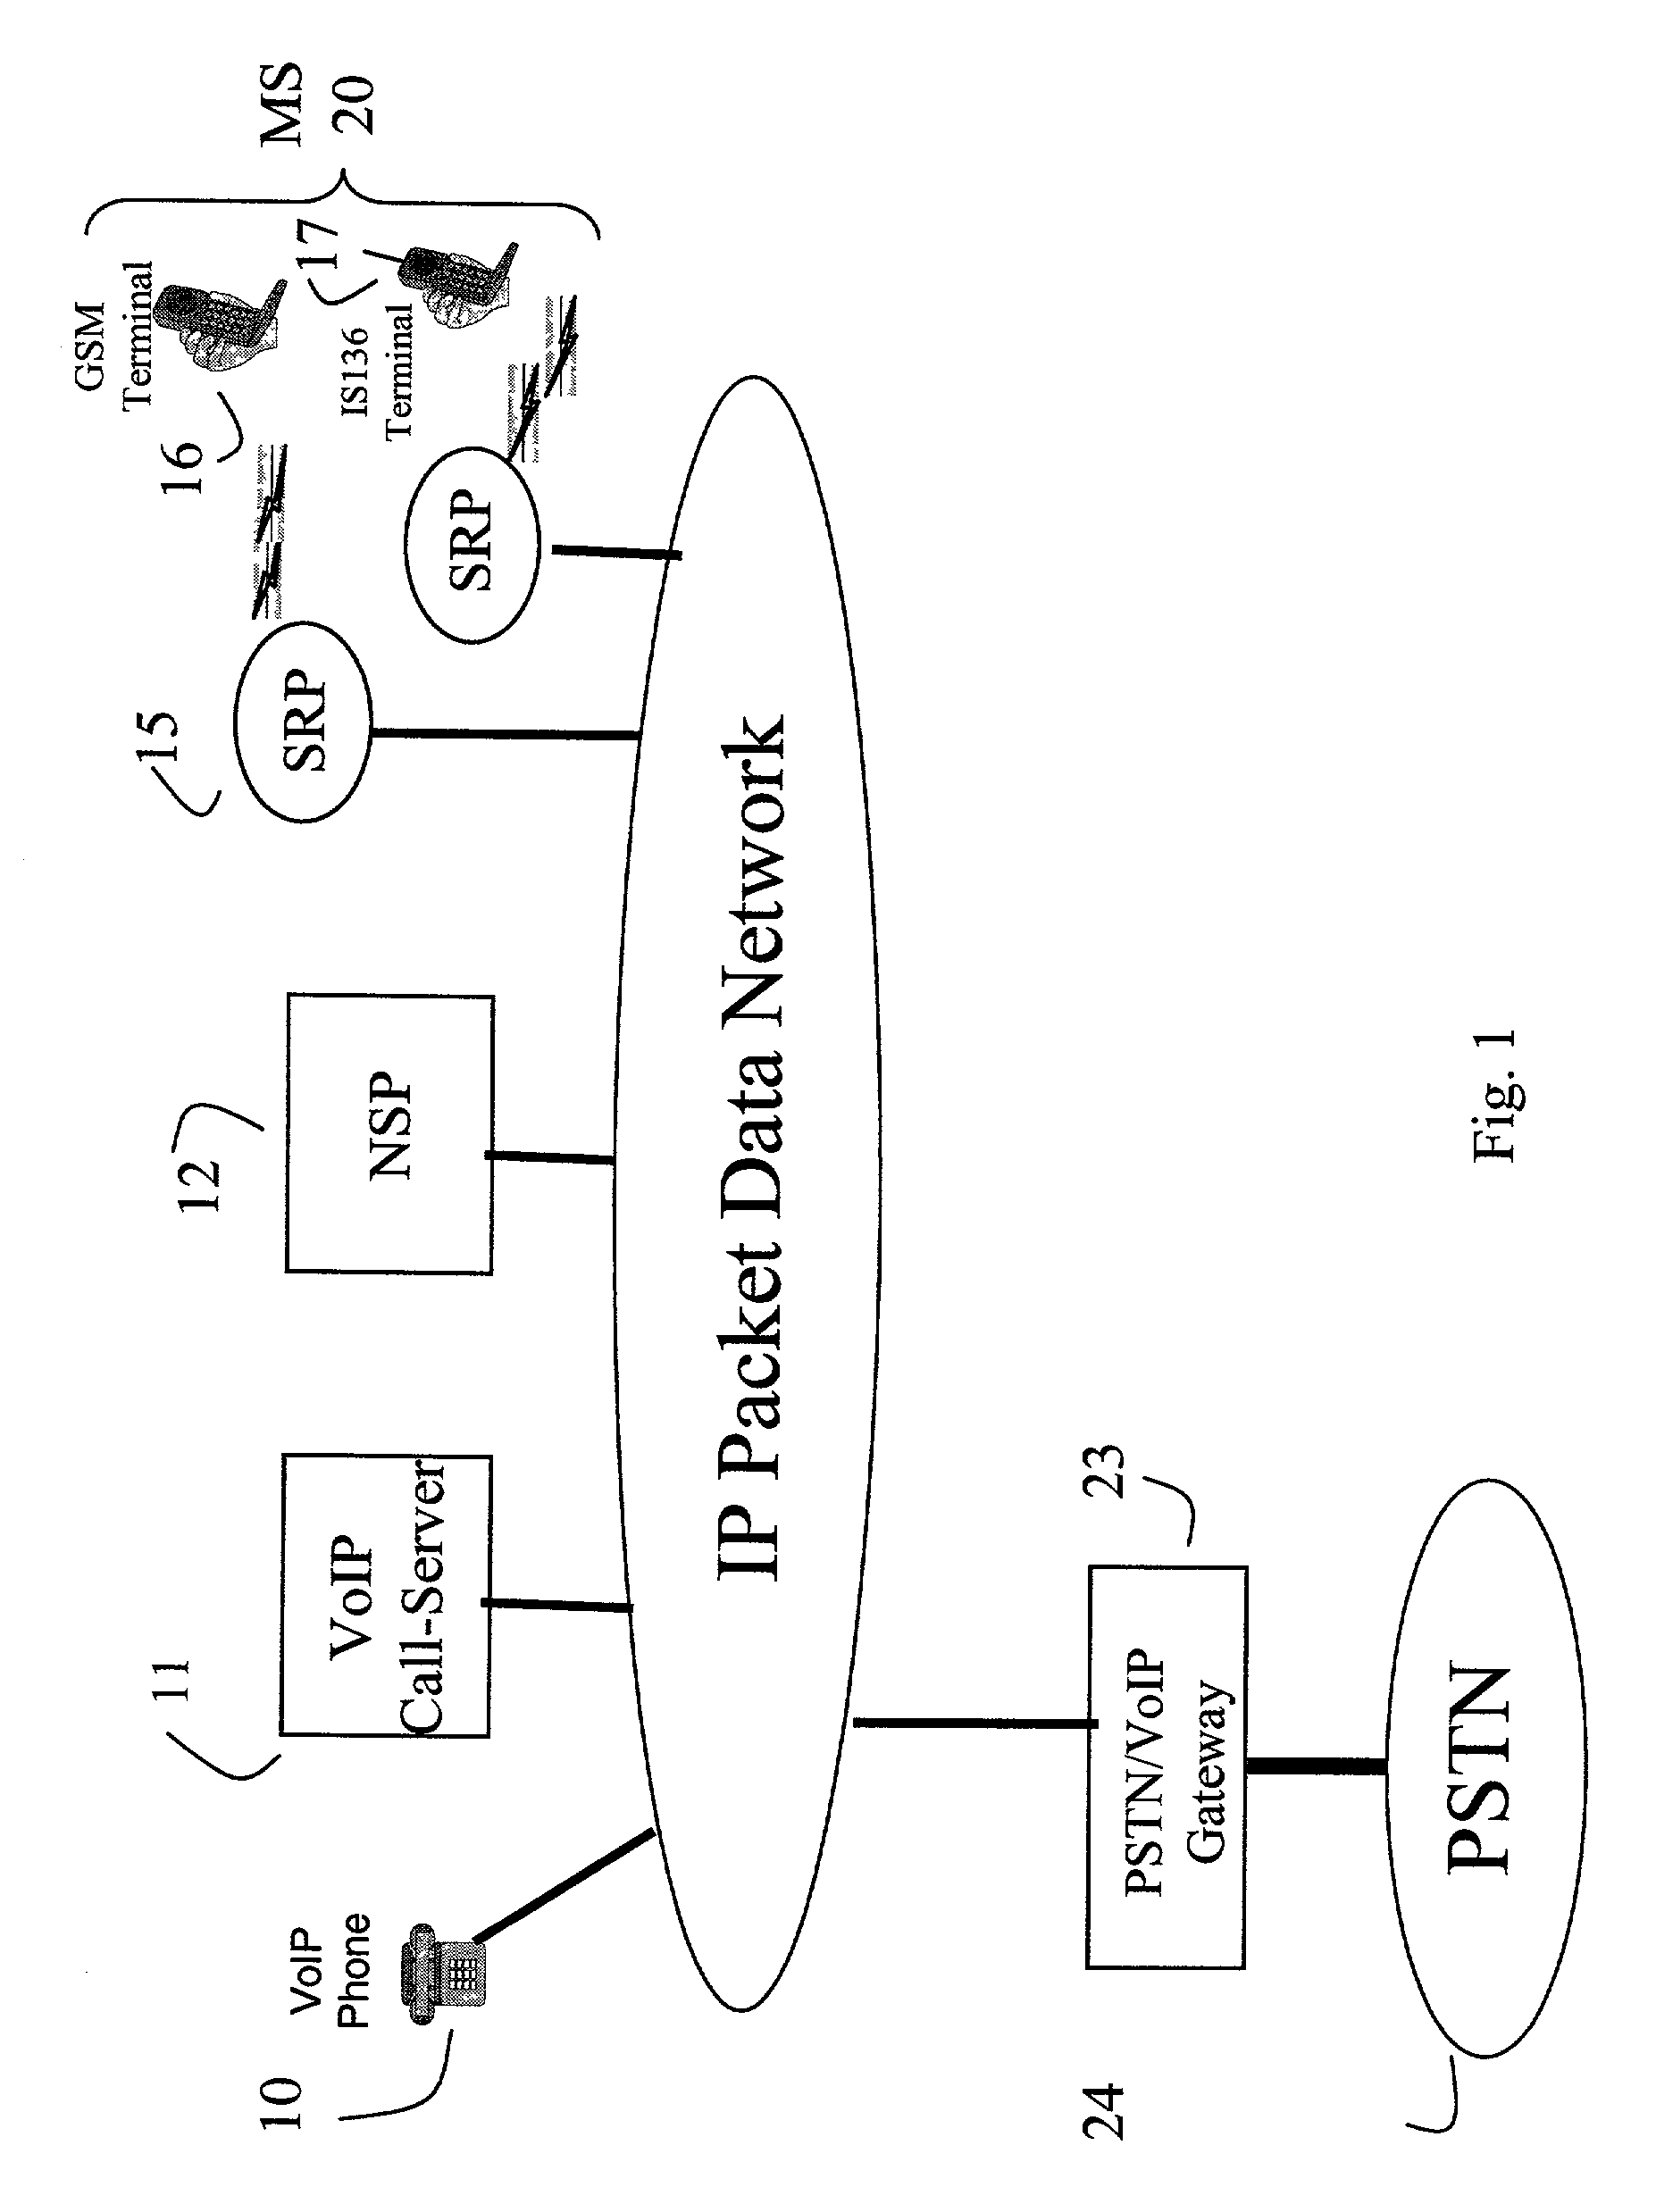 Method for providing VoIP services for wireless terminals